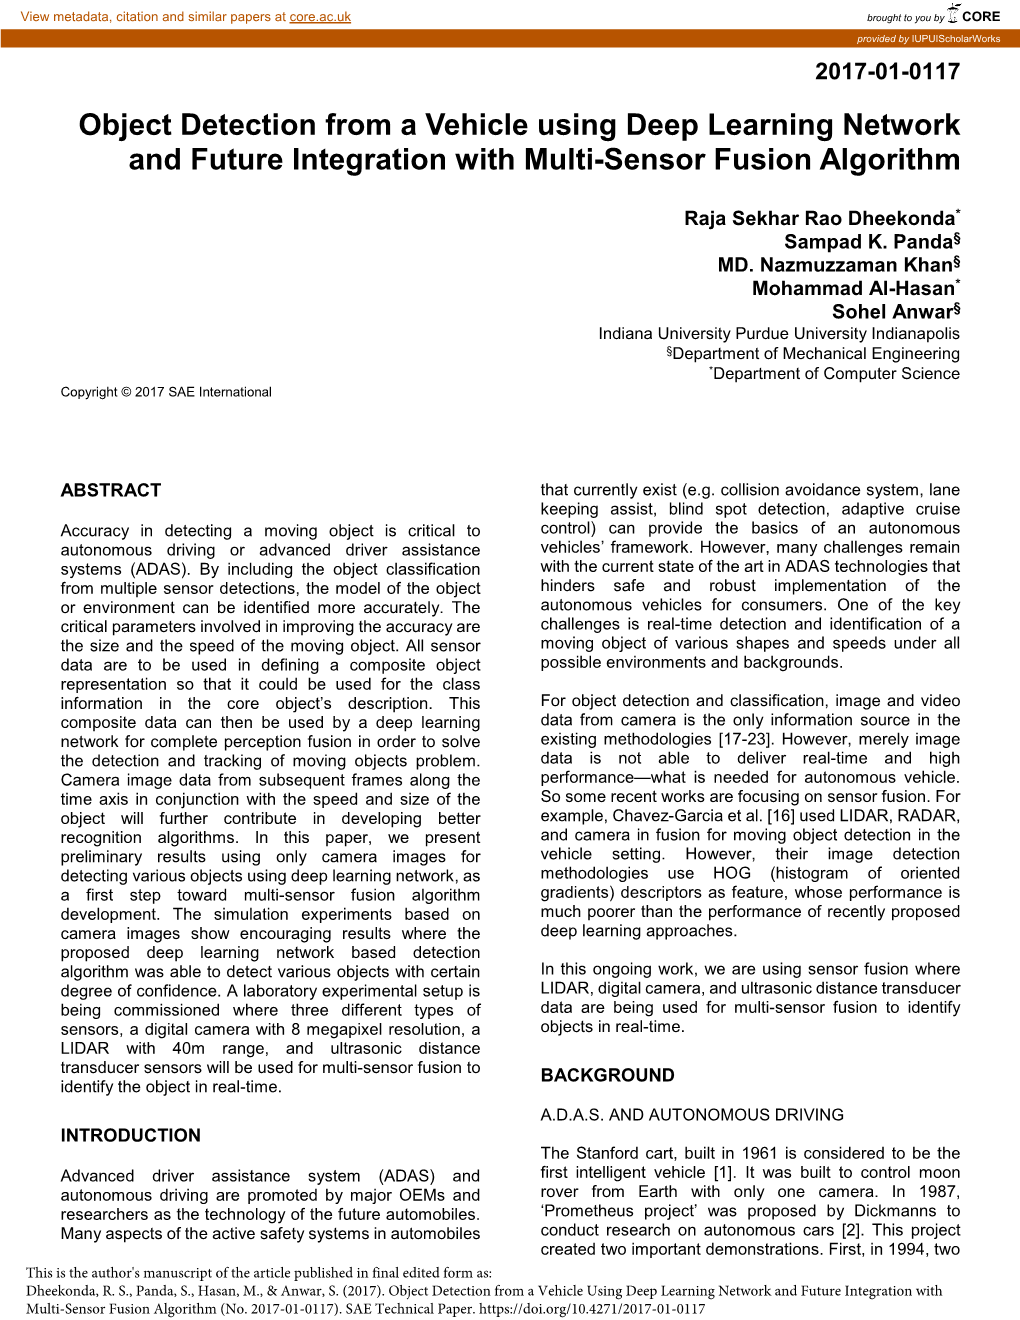 Object Detection from a Vehicle Using Deep Learning Network and Future Integration with Multi-Sensor Fusion Algorithm